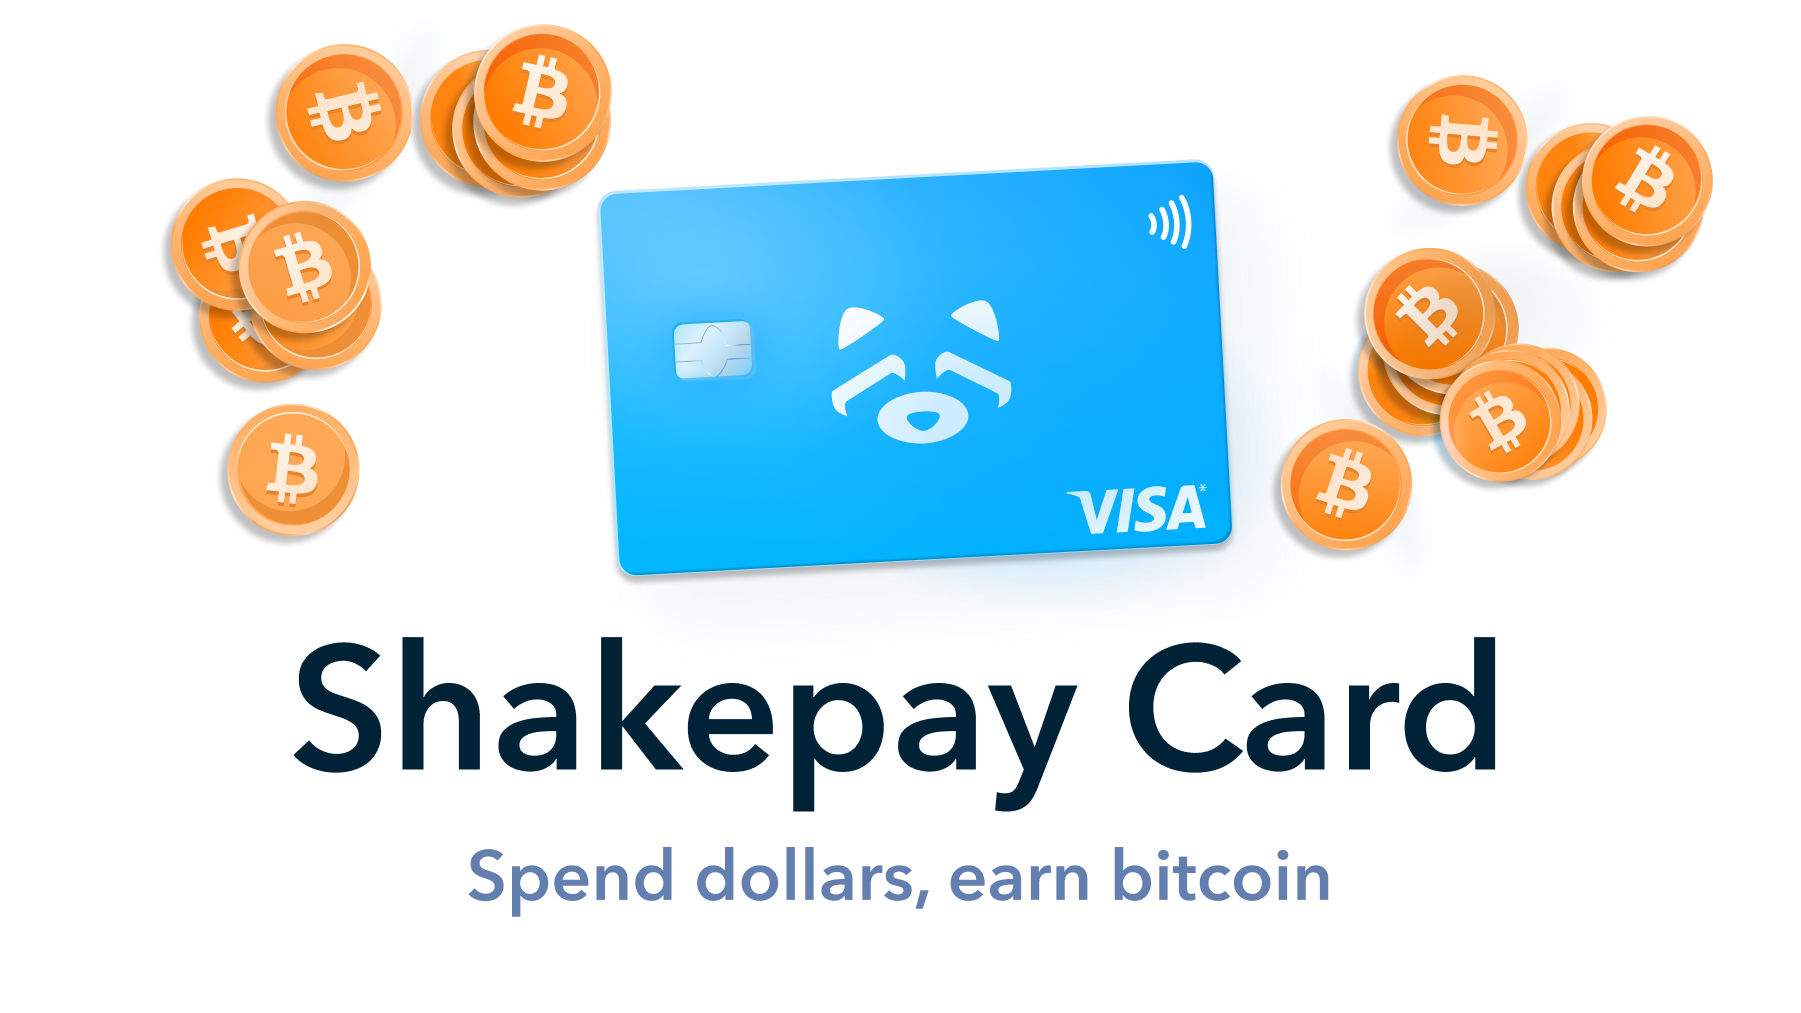 Introducing the Shakepay Card 💳